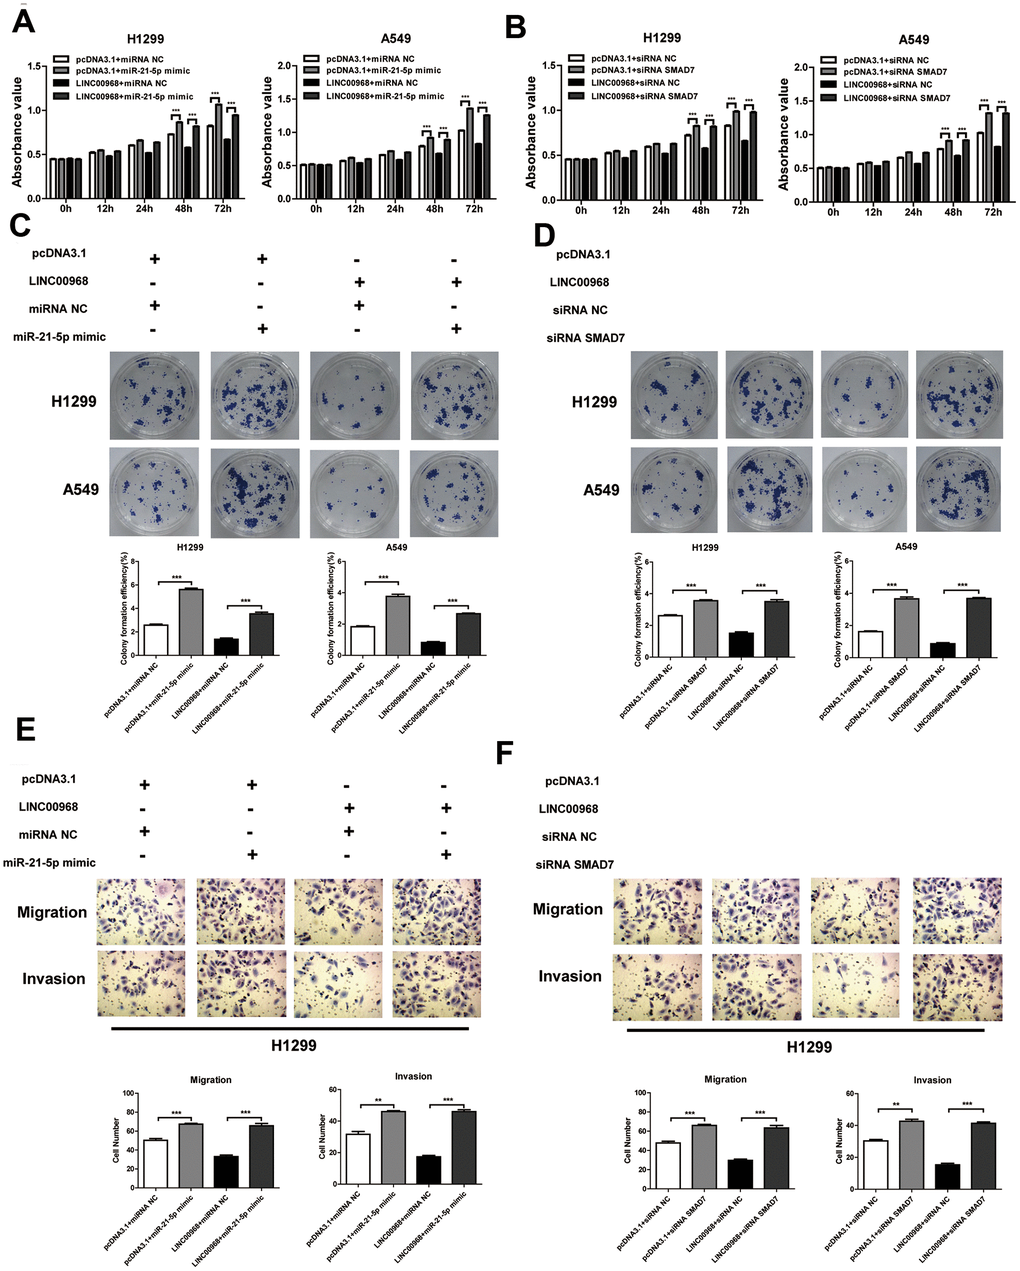 LINC00968 inhibits tumor development via sponging miR-21-5p/SMAD7 axis. The miR-21-5p mimics significantly increased cell proliferation (A), colony-forming ability (C), invasion, and migration (E), and also partially attenuated the inhibitory effects of LINC00968 over-expression. SMAD7 knockdown enhanced cell proliferation (B), colony-forming ability (D), invasion, and migration (F), and also partially attenuated the inhibitory effects of LINC00968 over-expression. **PP